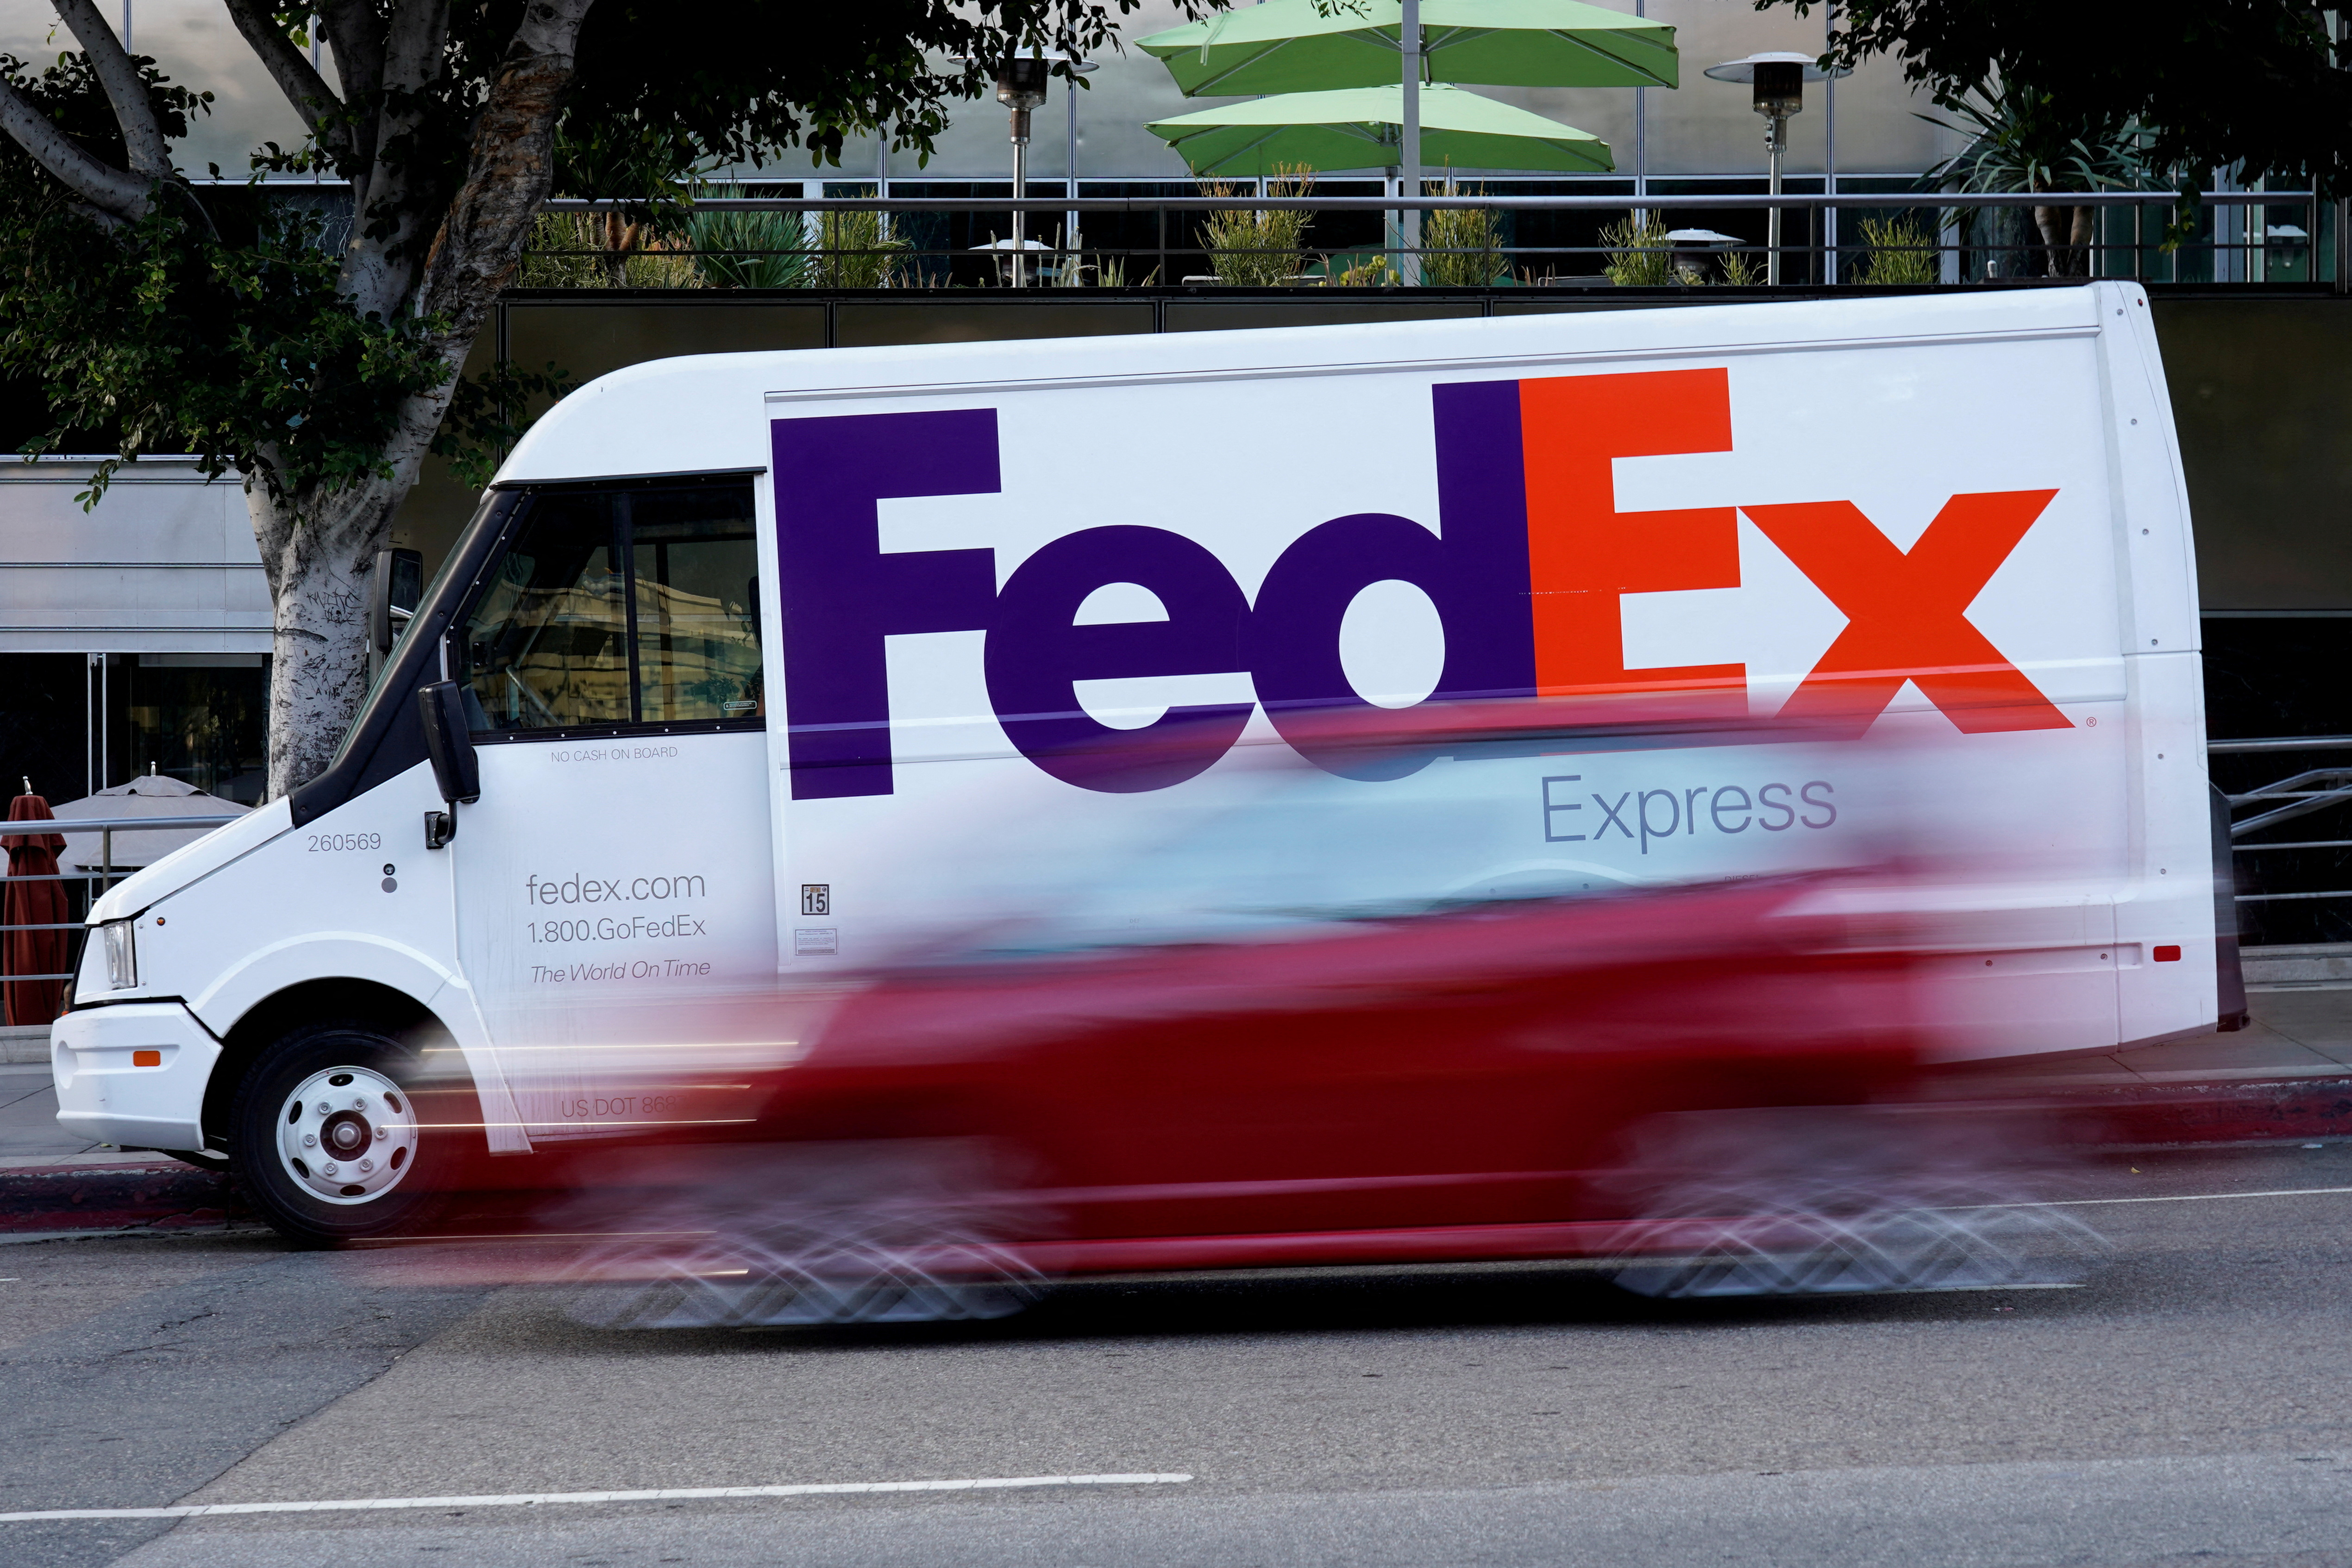 FILE PHOTO: A Federal Express truck is shown in Los Angeles, California